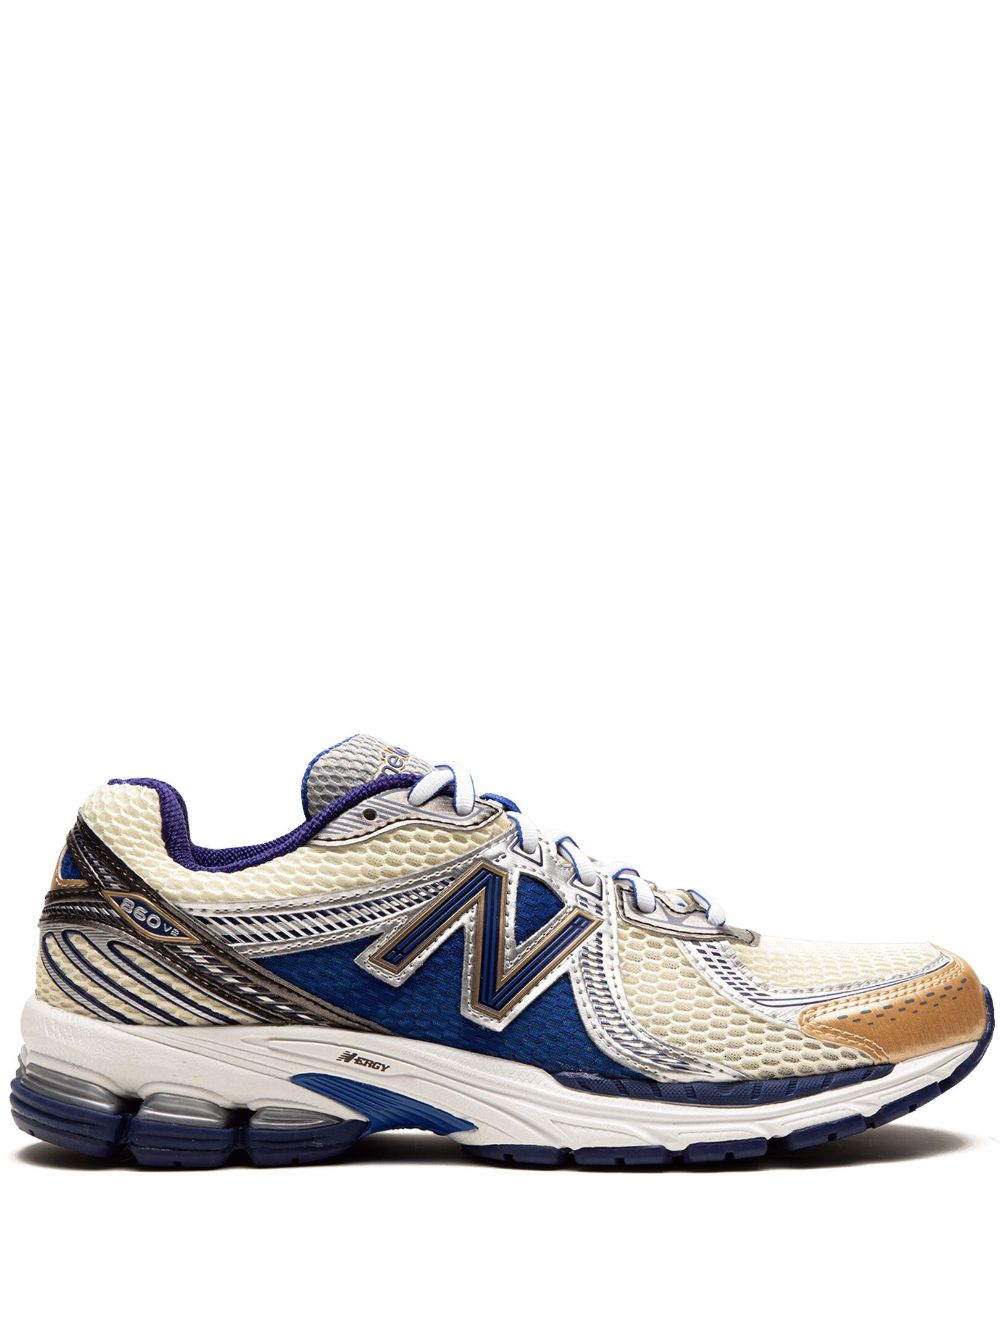 New Balance X Ald 860v2 Trainers In Blue